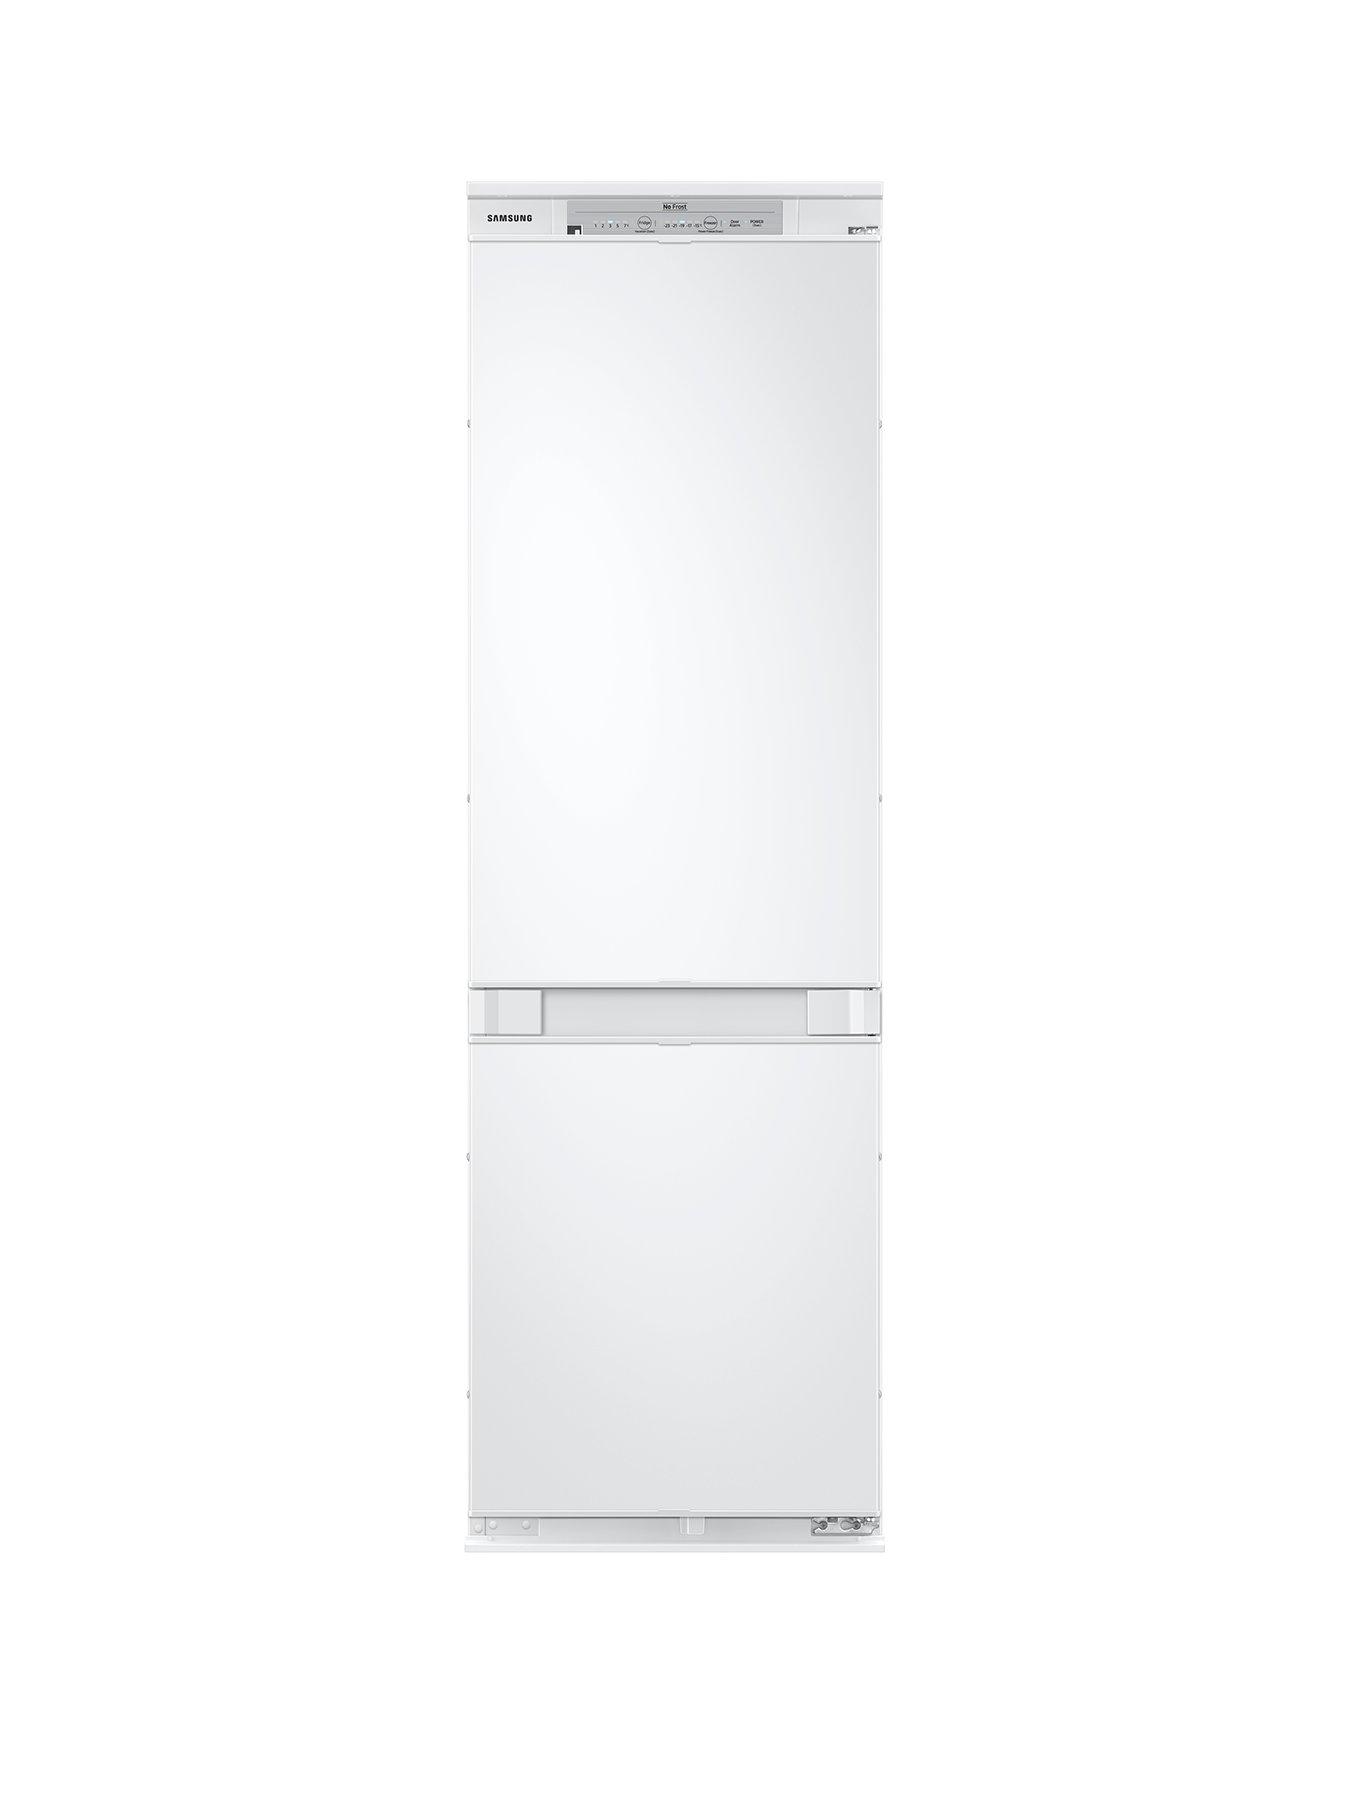 Samsung Brb260000Ww/Eu 60Cm Integrated Frost Free Fridge Freezer With Total No Frost – White